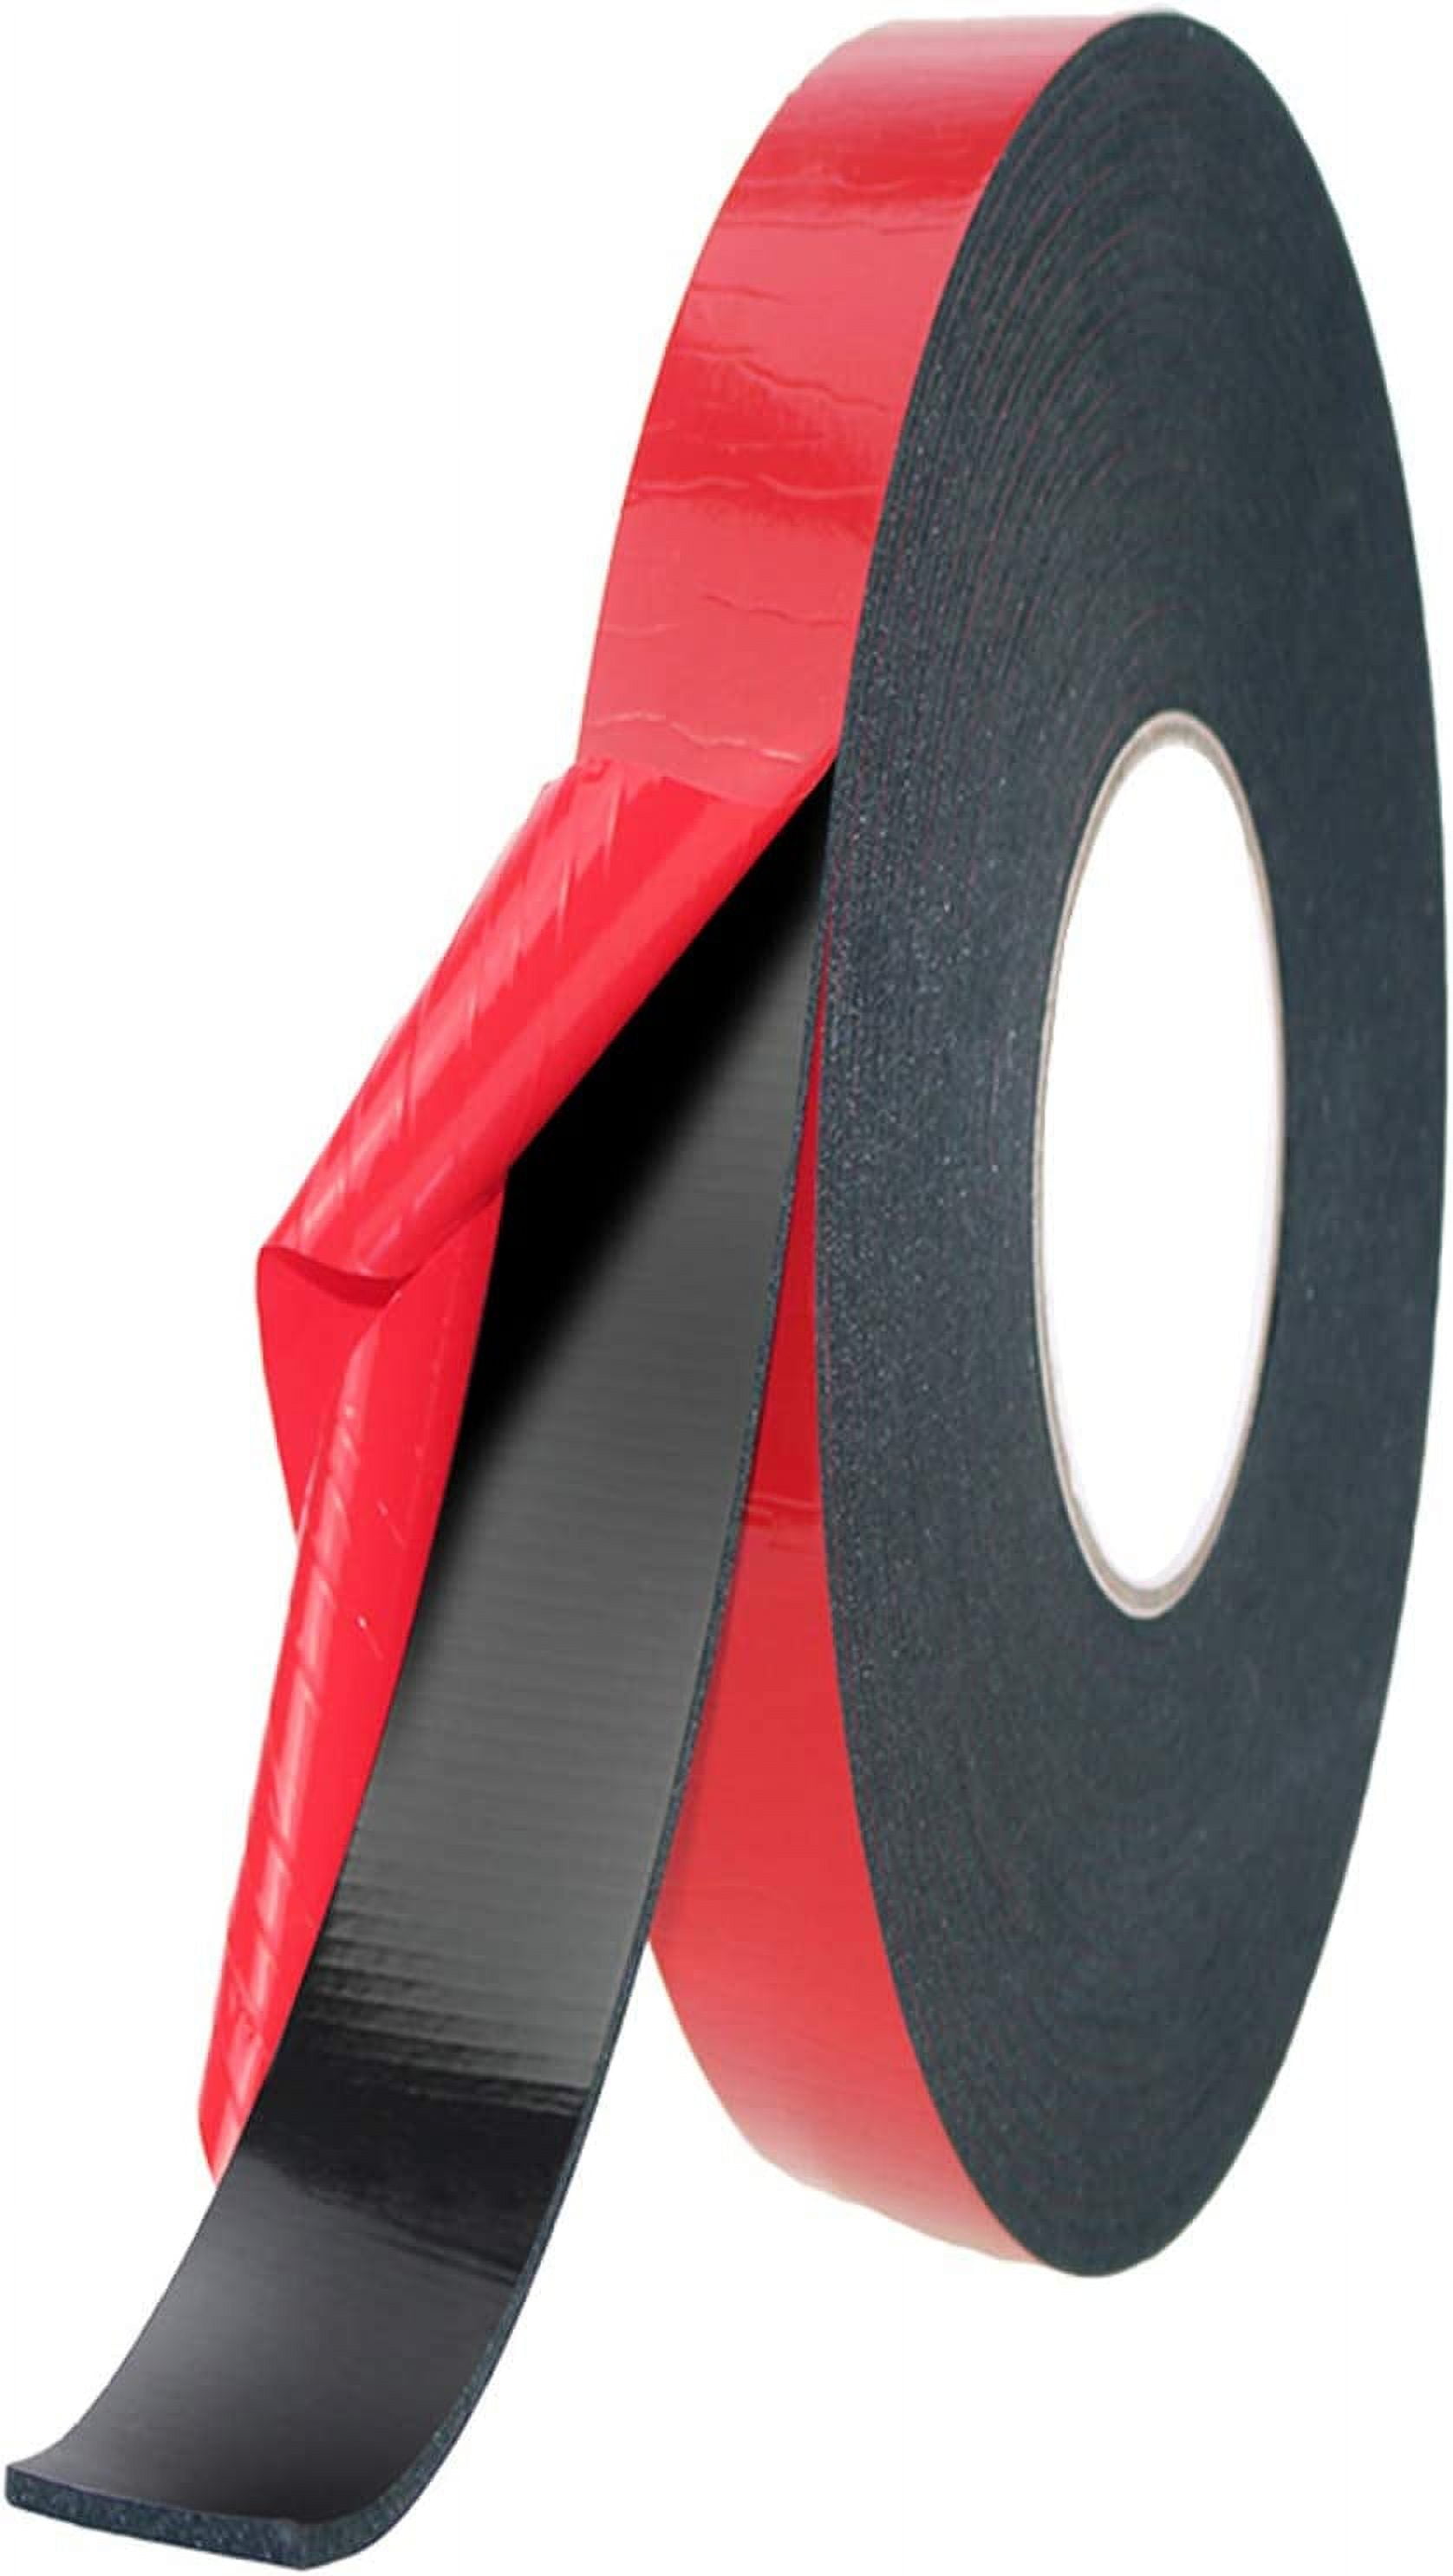 3m Super Strong Double Sided Tape